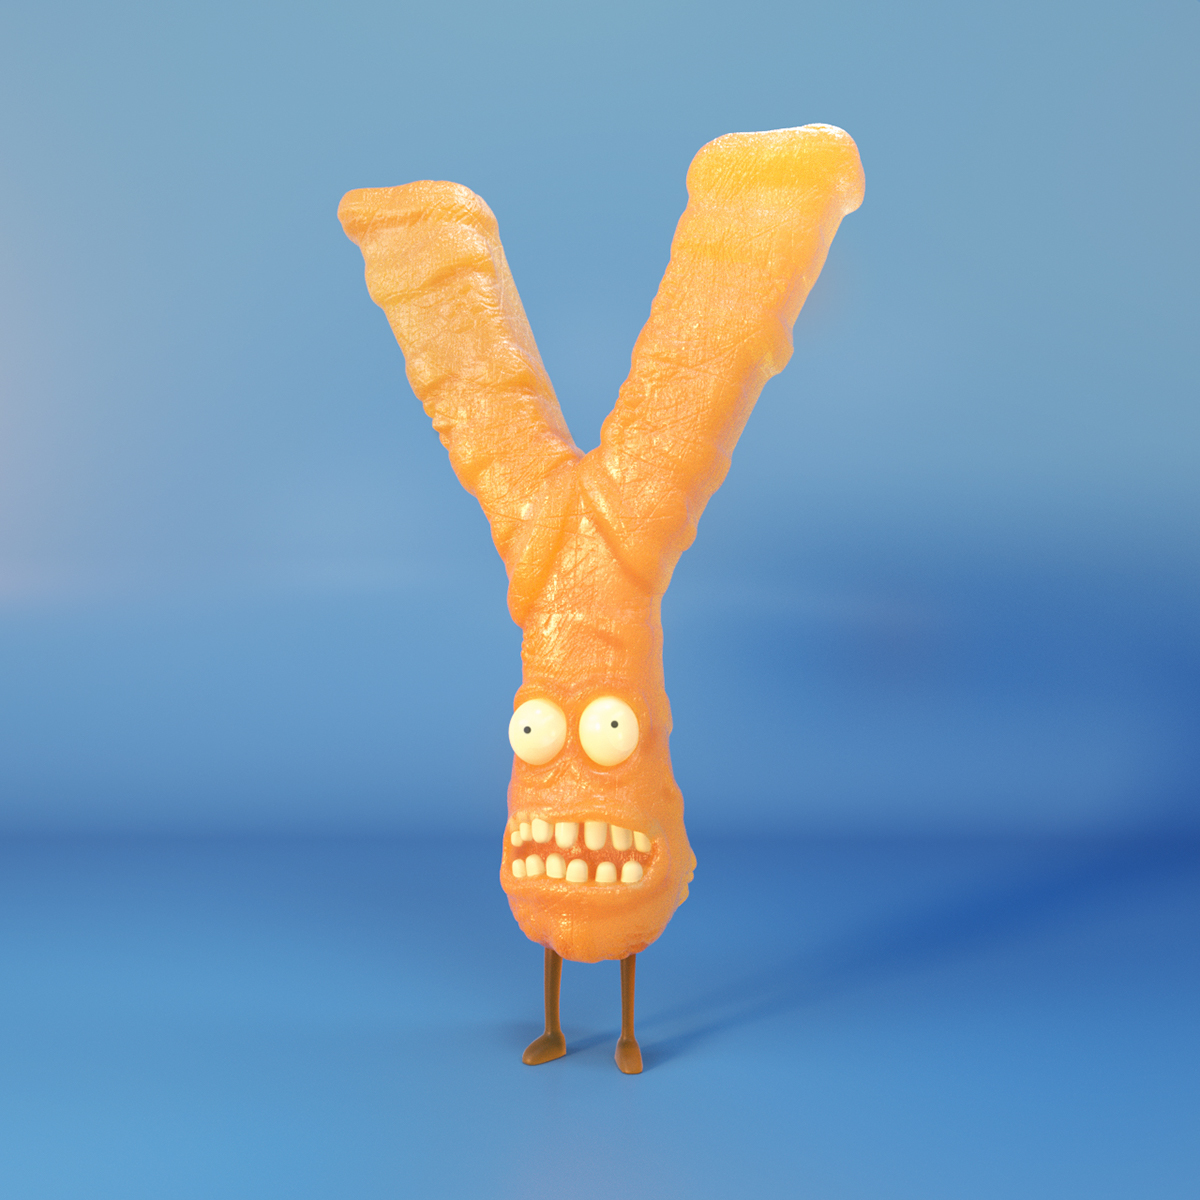 cinema4d monsters characters 36daysoftype typography   3D